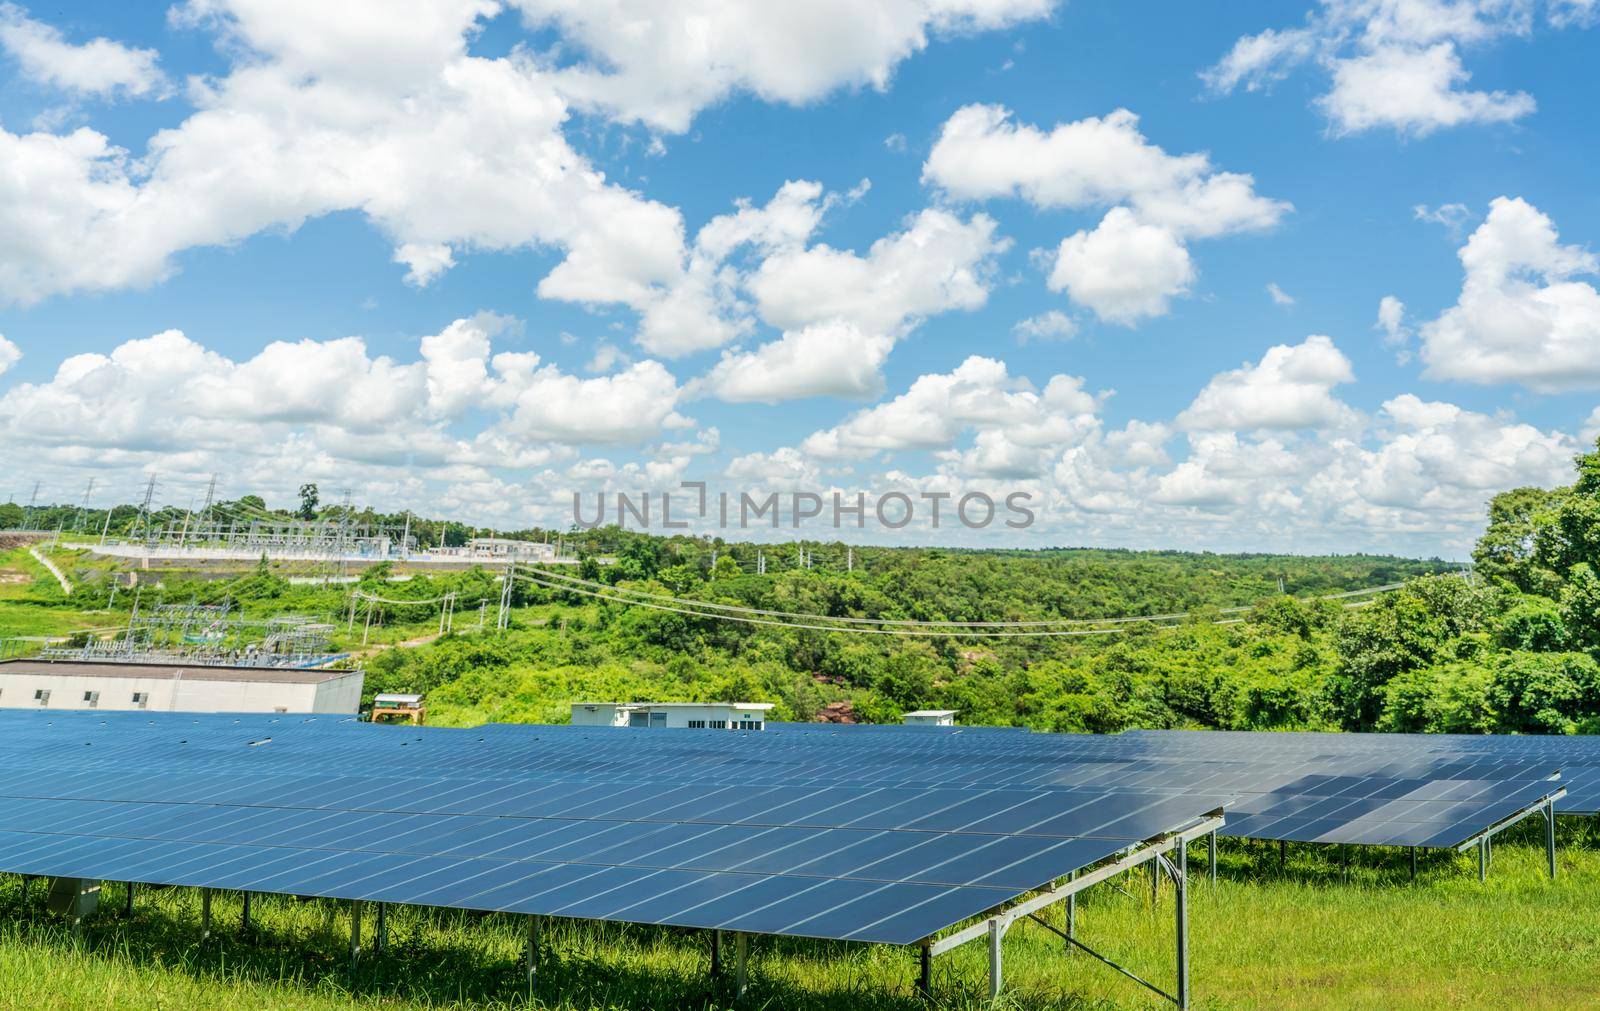 Photovoltaic power station or solar park. PV system. Solar farm and green field. Solar power for green energy. Photovoltaic power plant generate solar energy. Renewable energy. Sustainable resources.